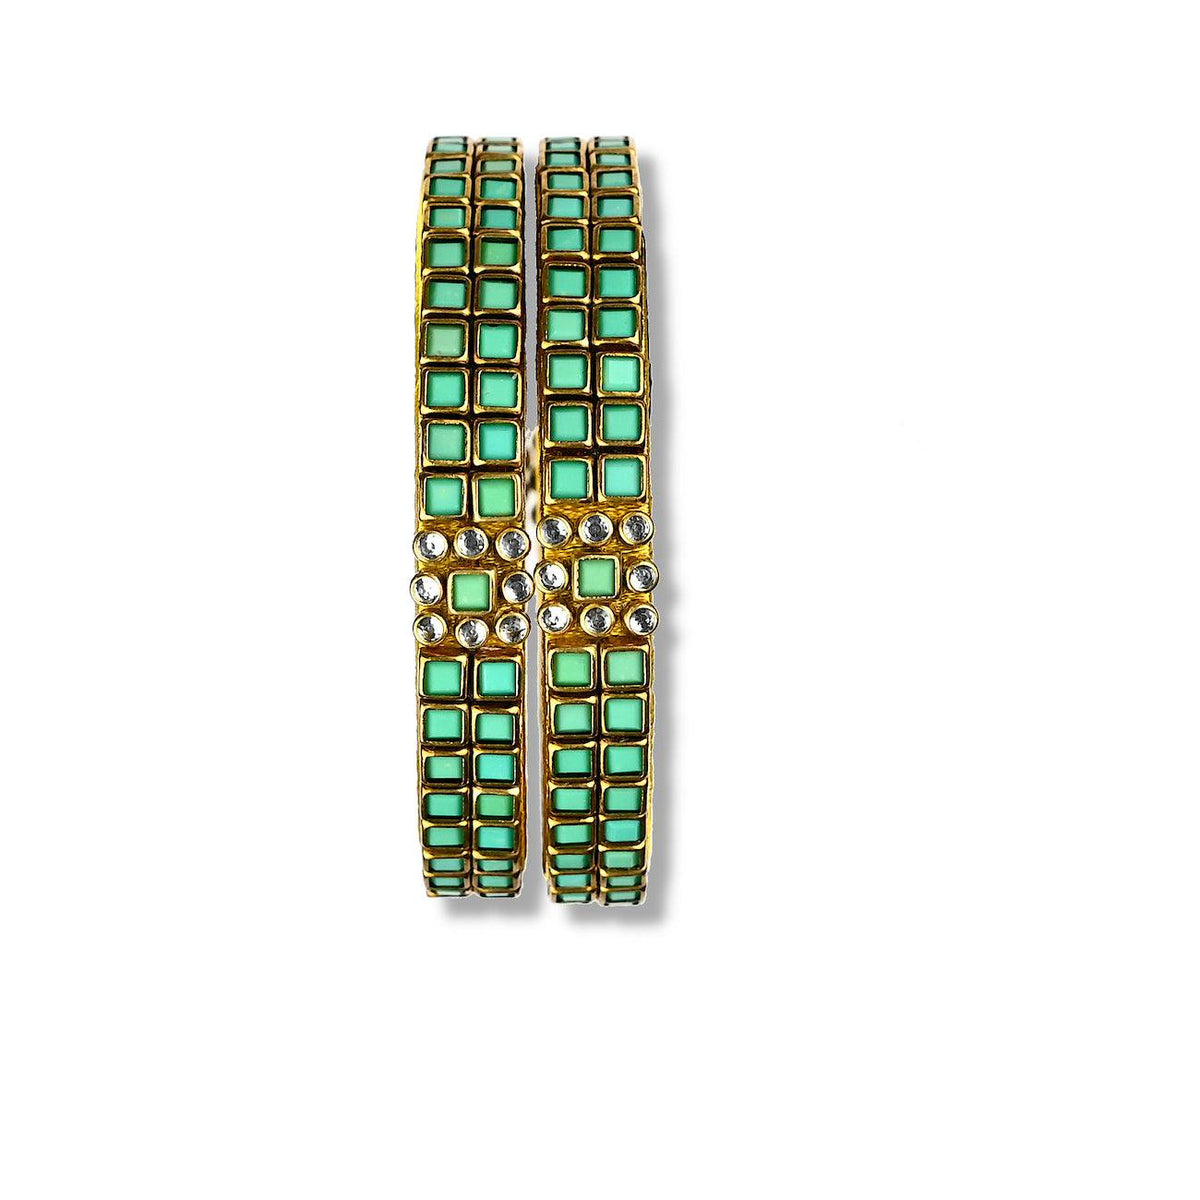 Turquoise blue Kundan stone bangle decorated with aqua blue and glass colored Kundan stone bezels in square & circle shape over gold silk threads.